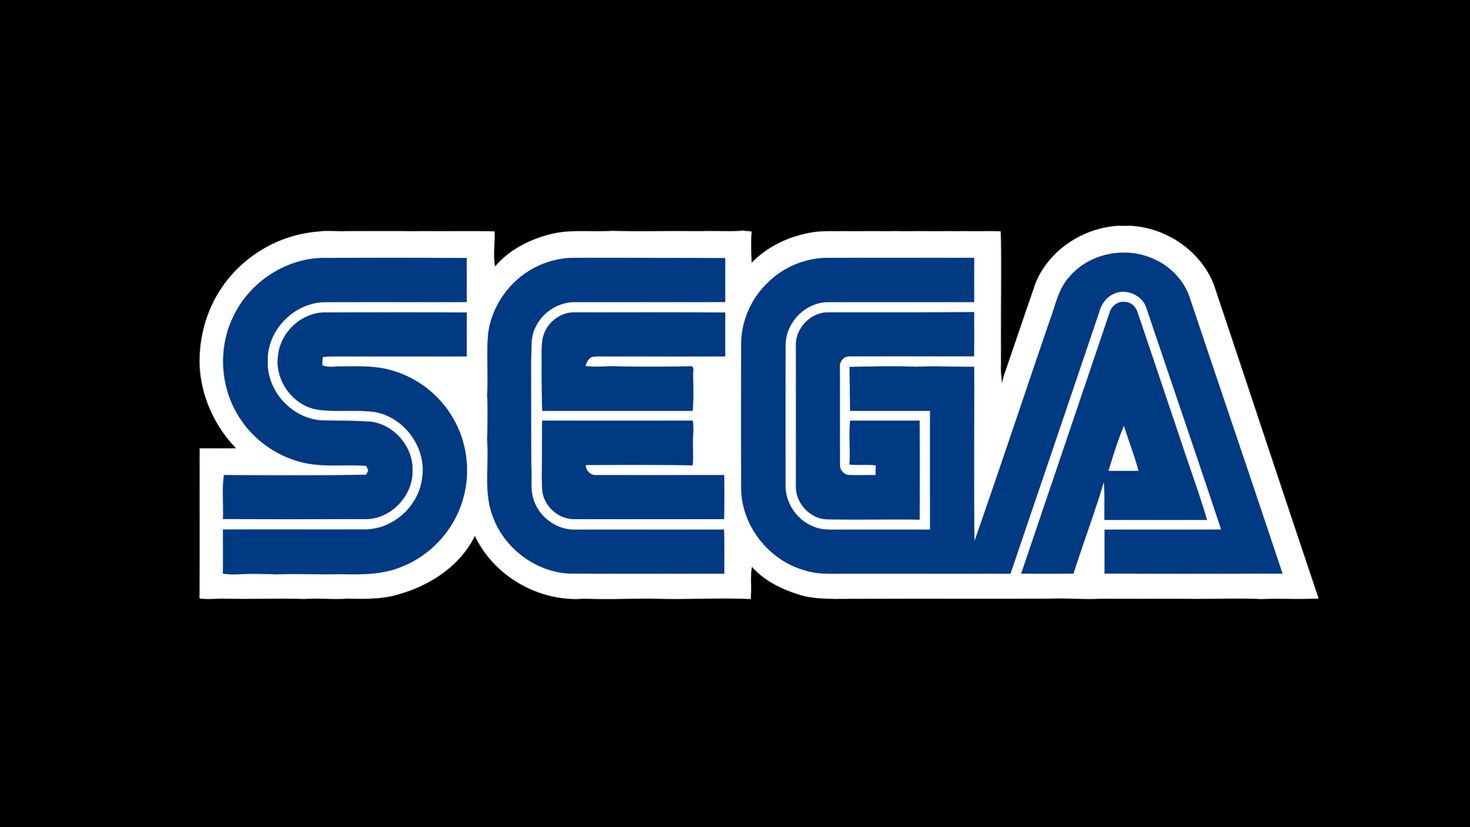 A quarter of a century later, Sega brings Daytona USA 2 to gaming consoles for the first time